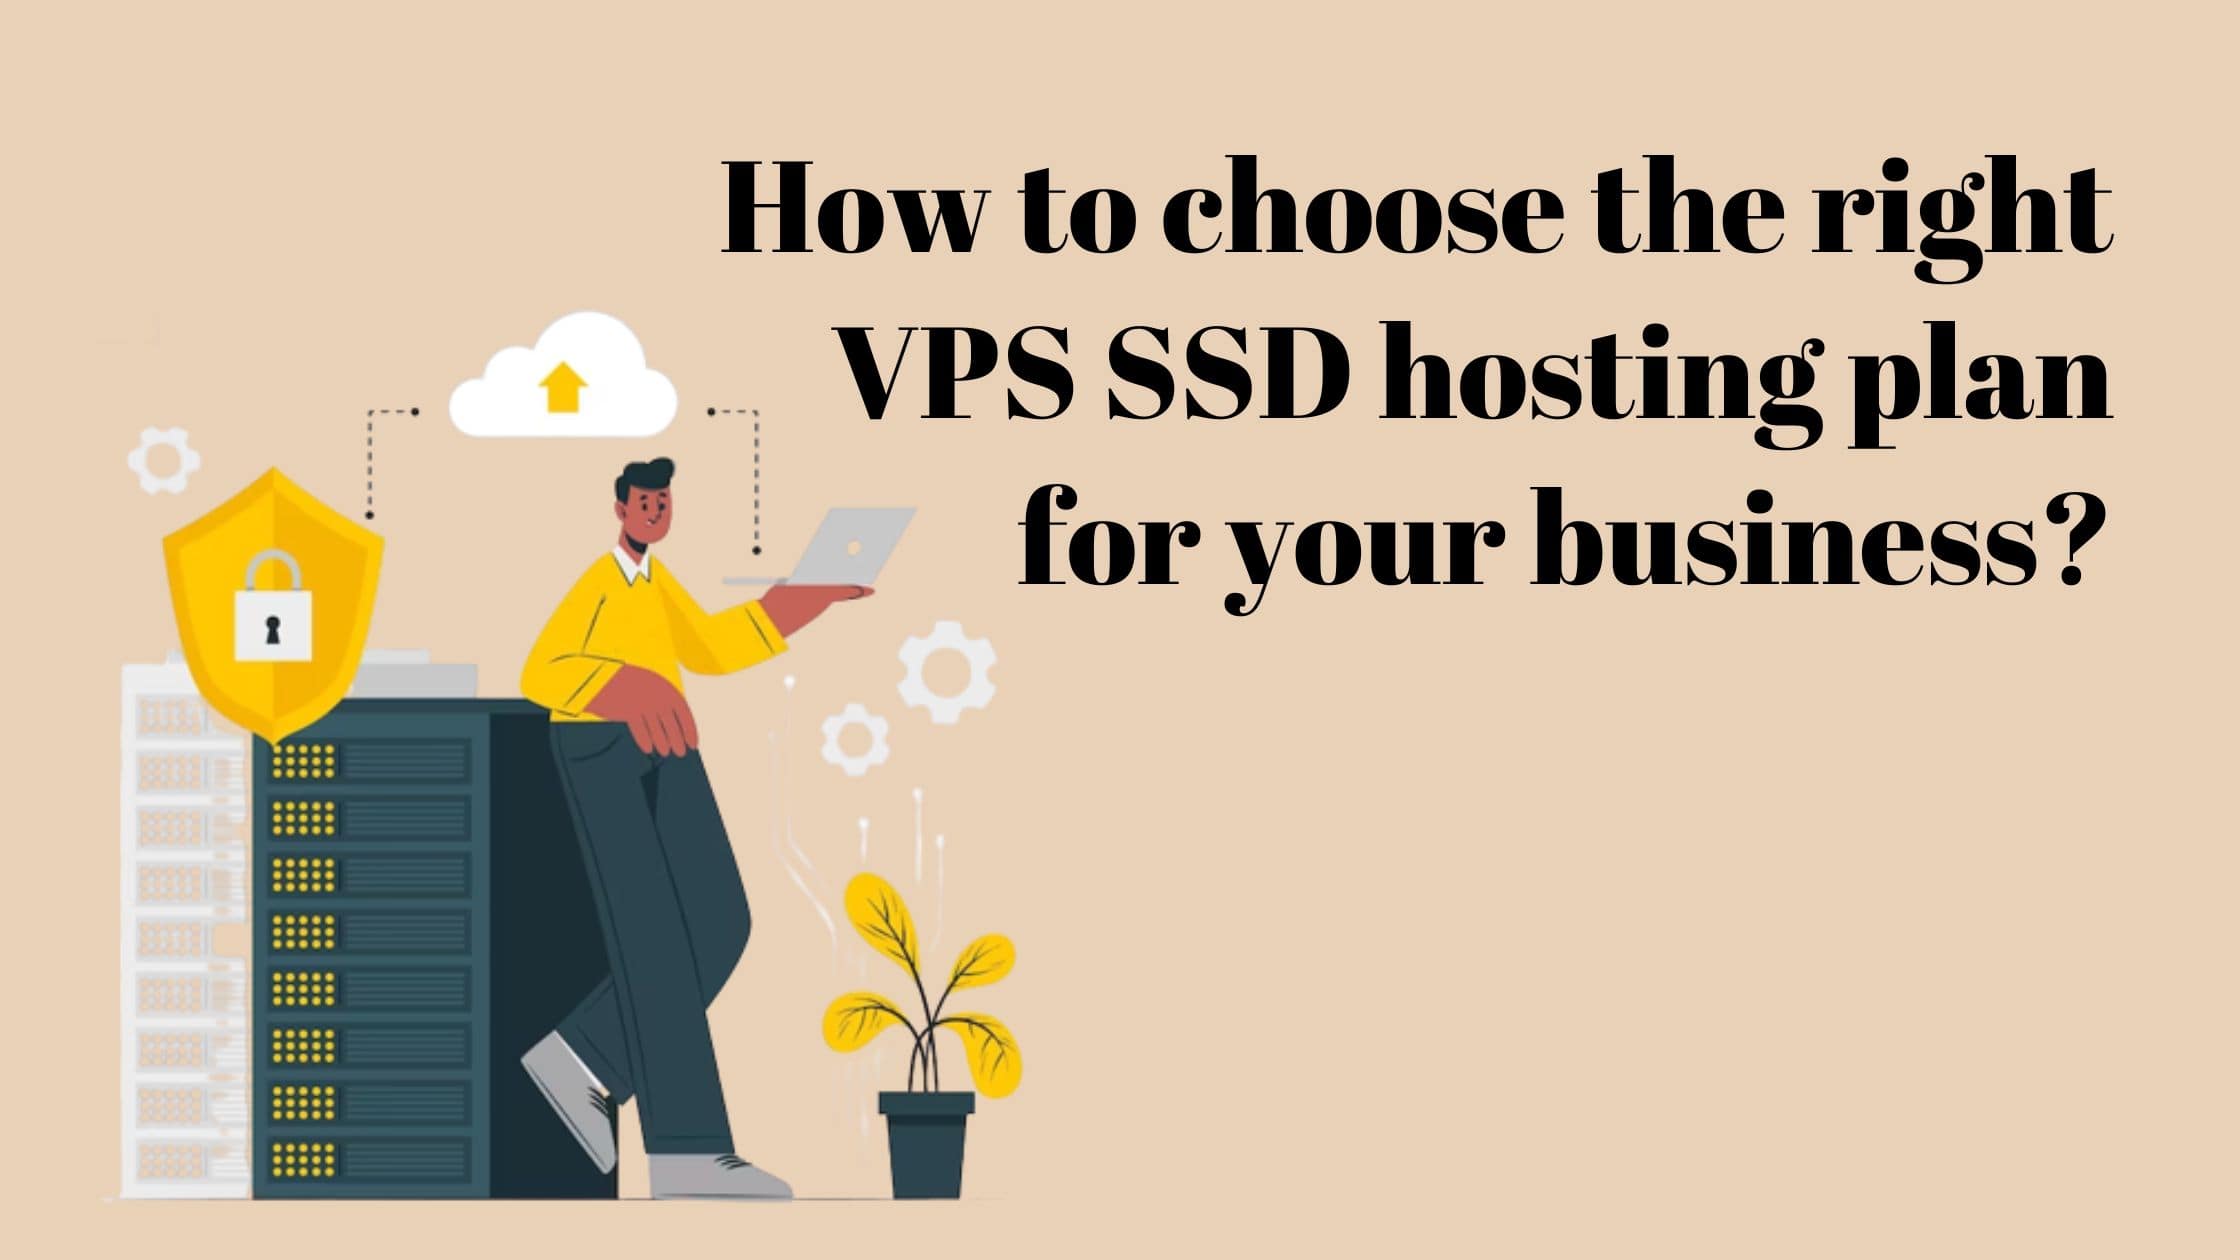 How to choose the right VPS SSD hosting plan for your business?